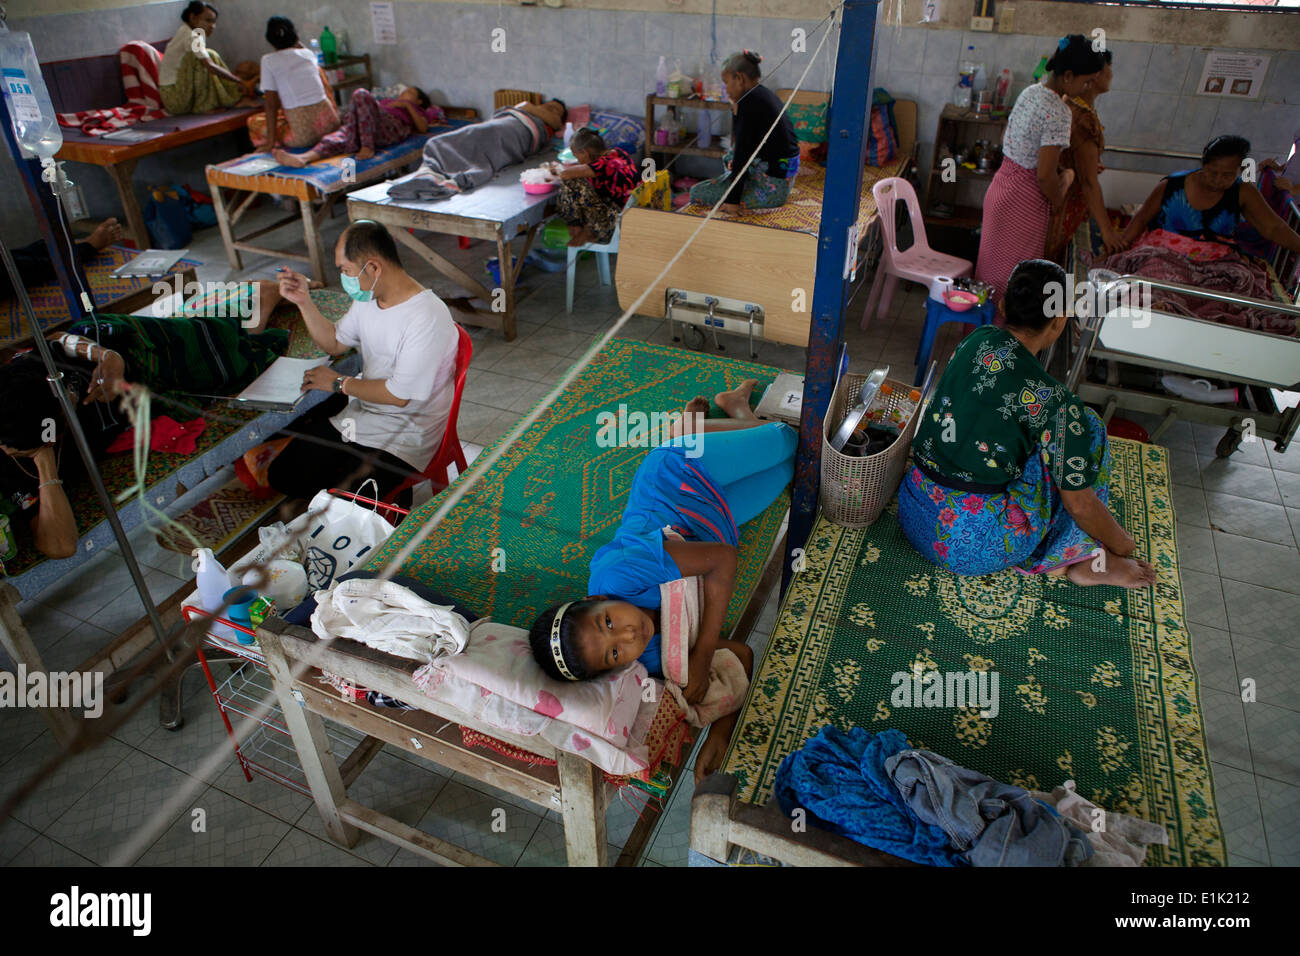 Patients fill up the hospital beds. The Mae Tao Clinic serves thousands of refugees from Myanmar, people displaced by decades of internal conflict. Stock Photo